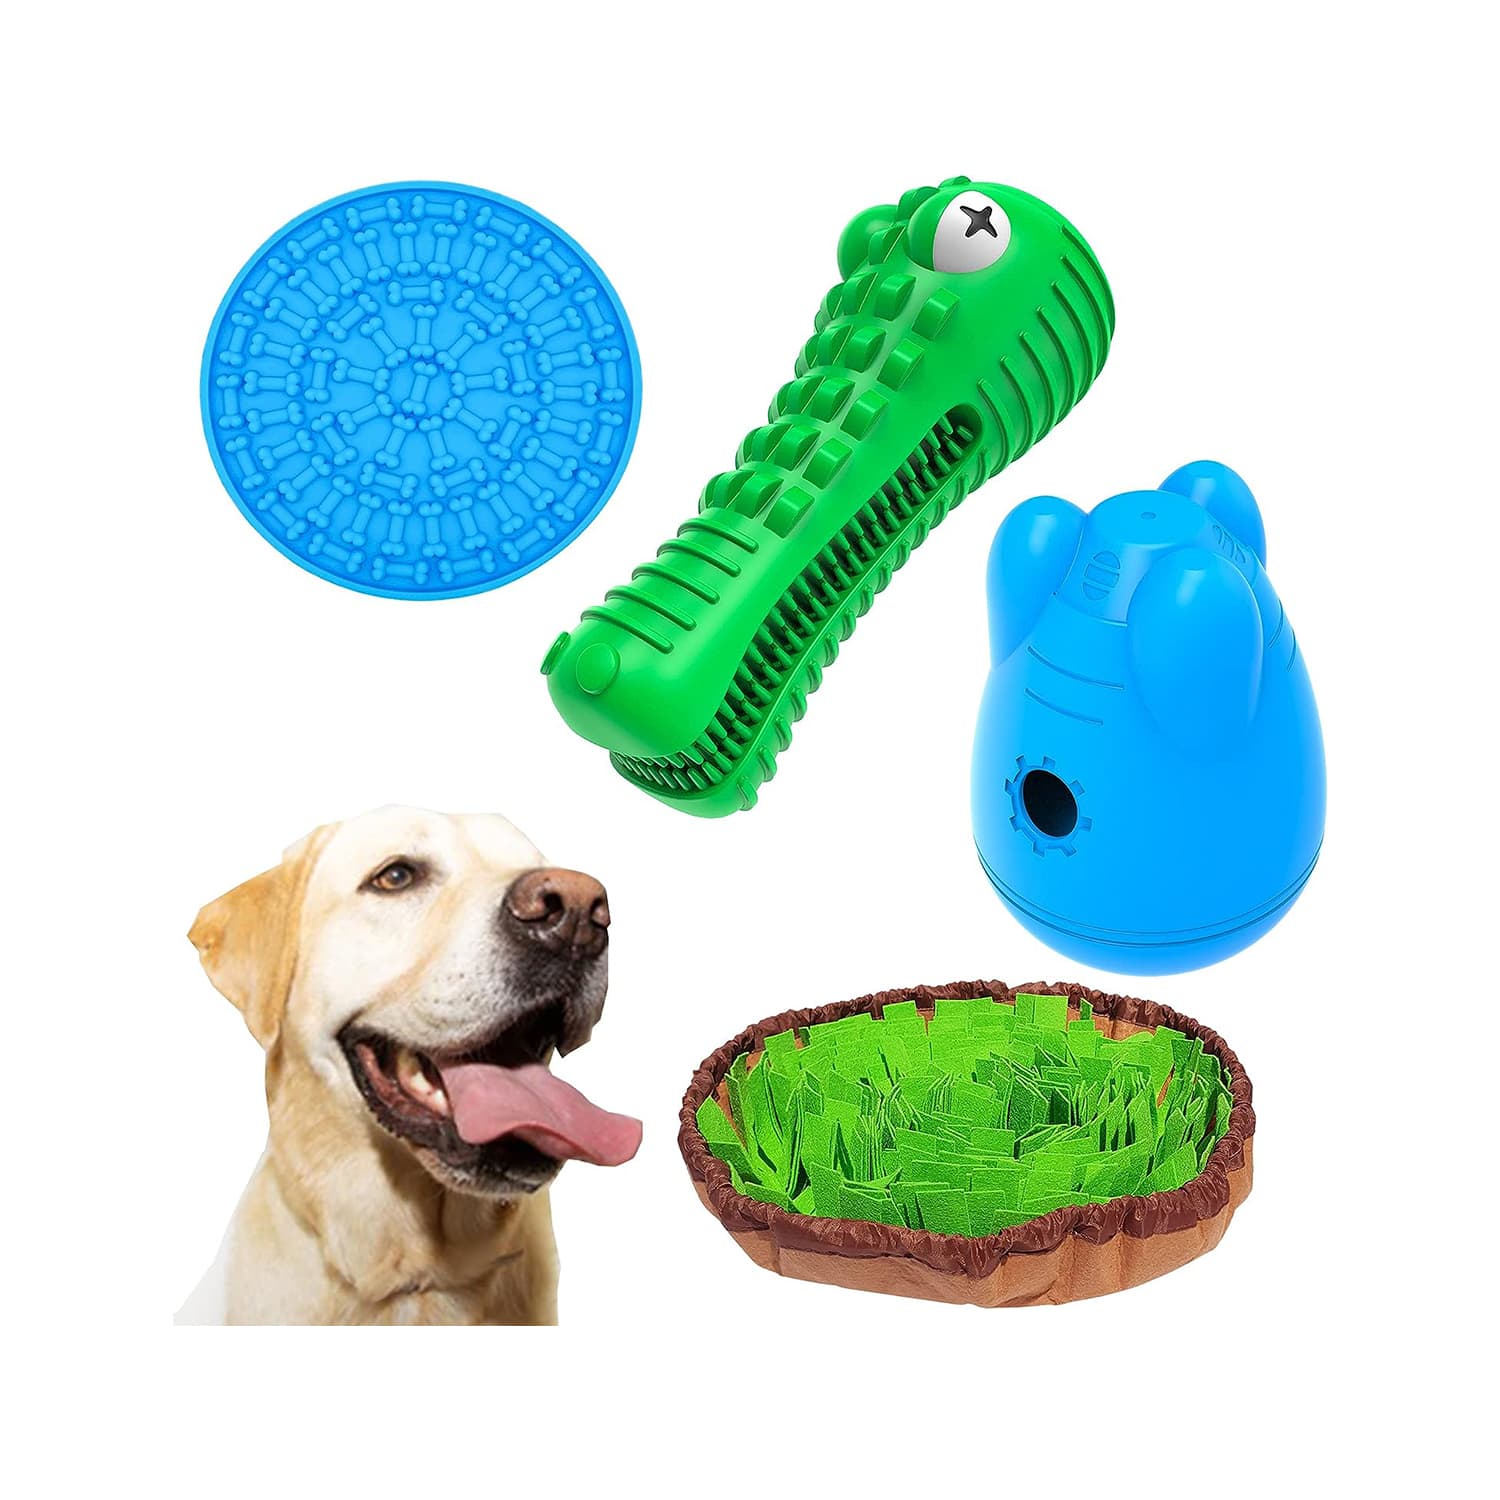 29 Best Interactive Dog Toys [2023 Reviews] in 2023  Interactive dog toys,  Small dog toys, Dog toy storage